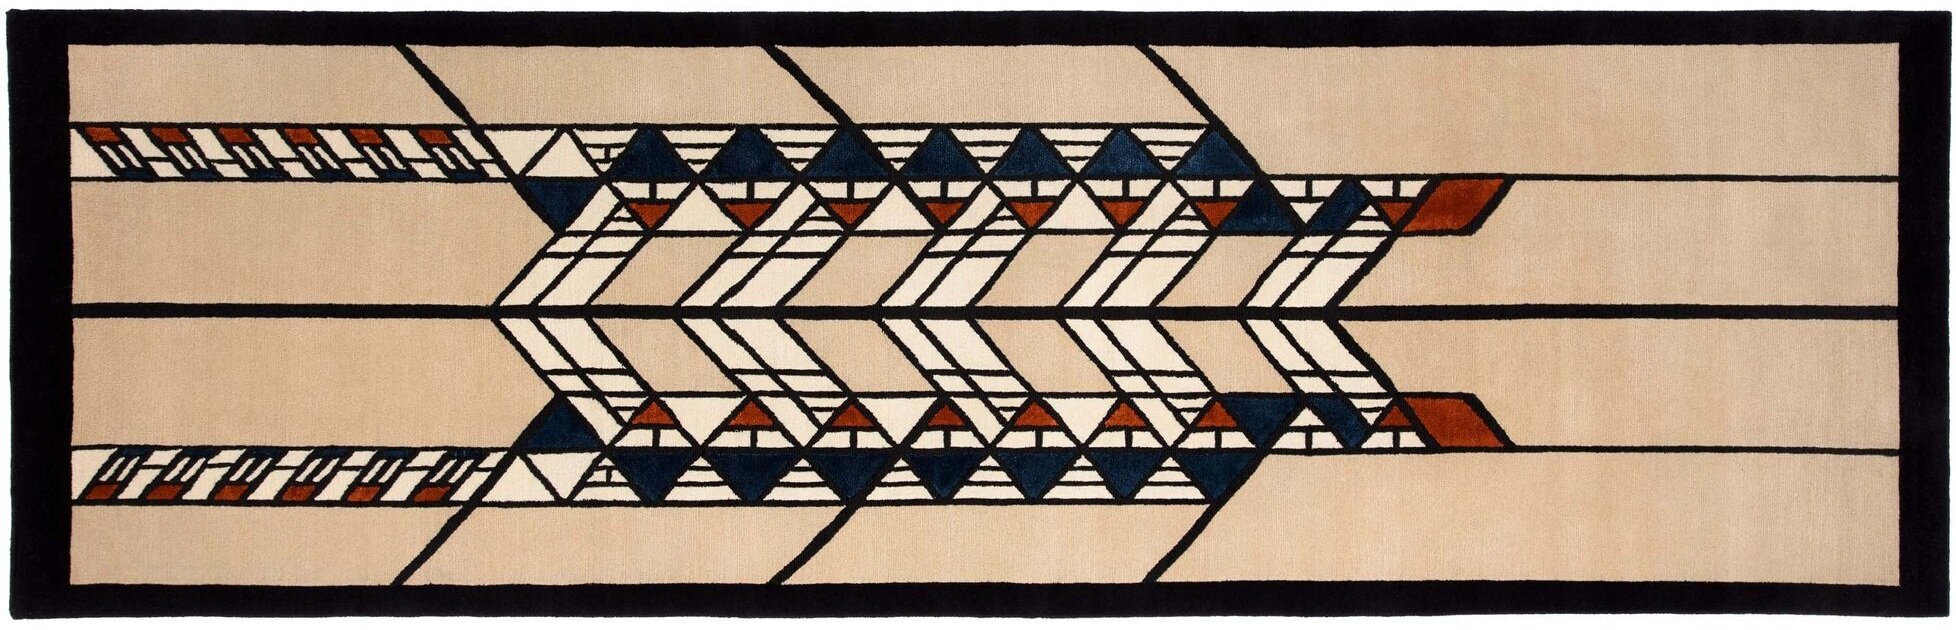 These Frank Lloyd Wright Inspired Rugs